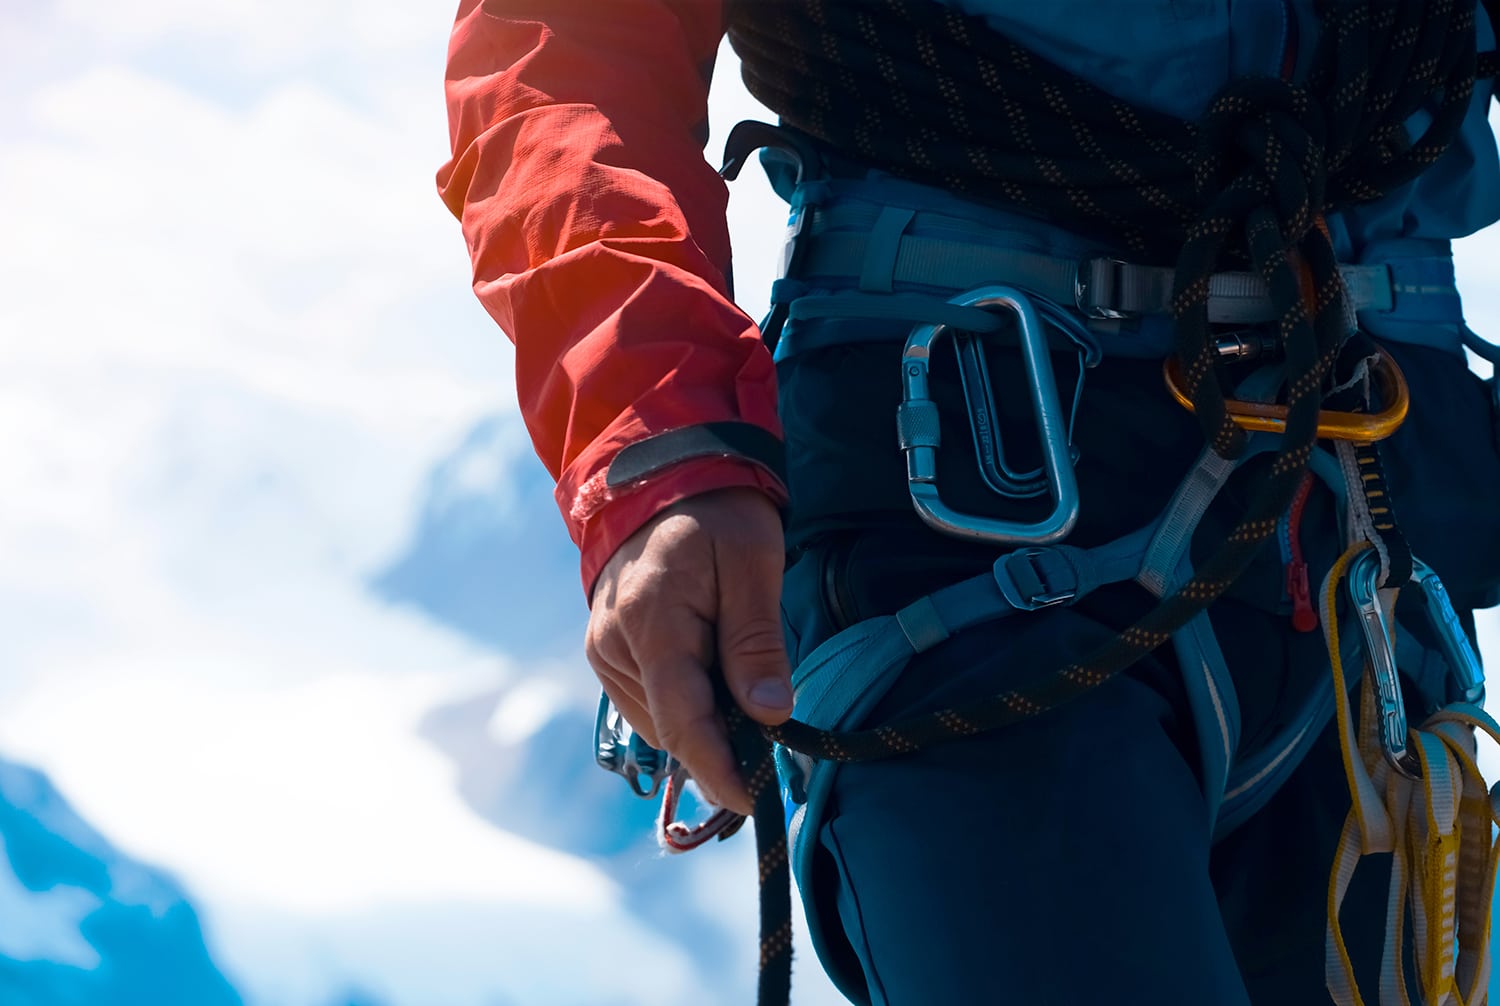 alpinist climbs to the top of a snowy mountain with climbing equipment, harness, carbines, rope